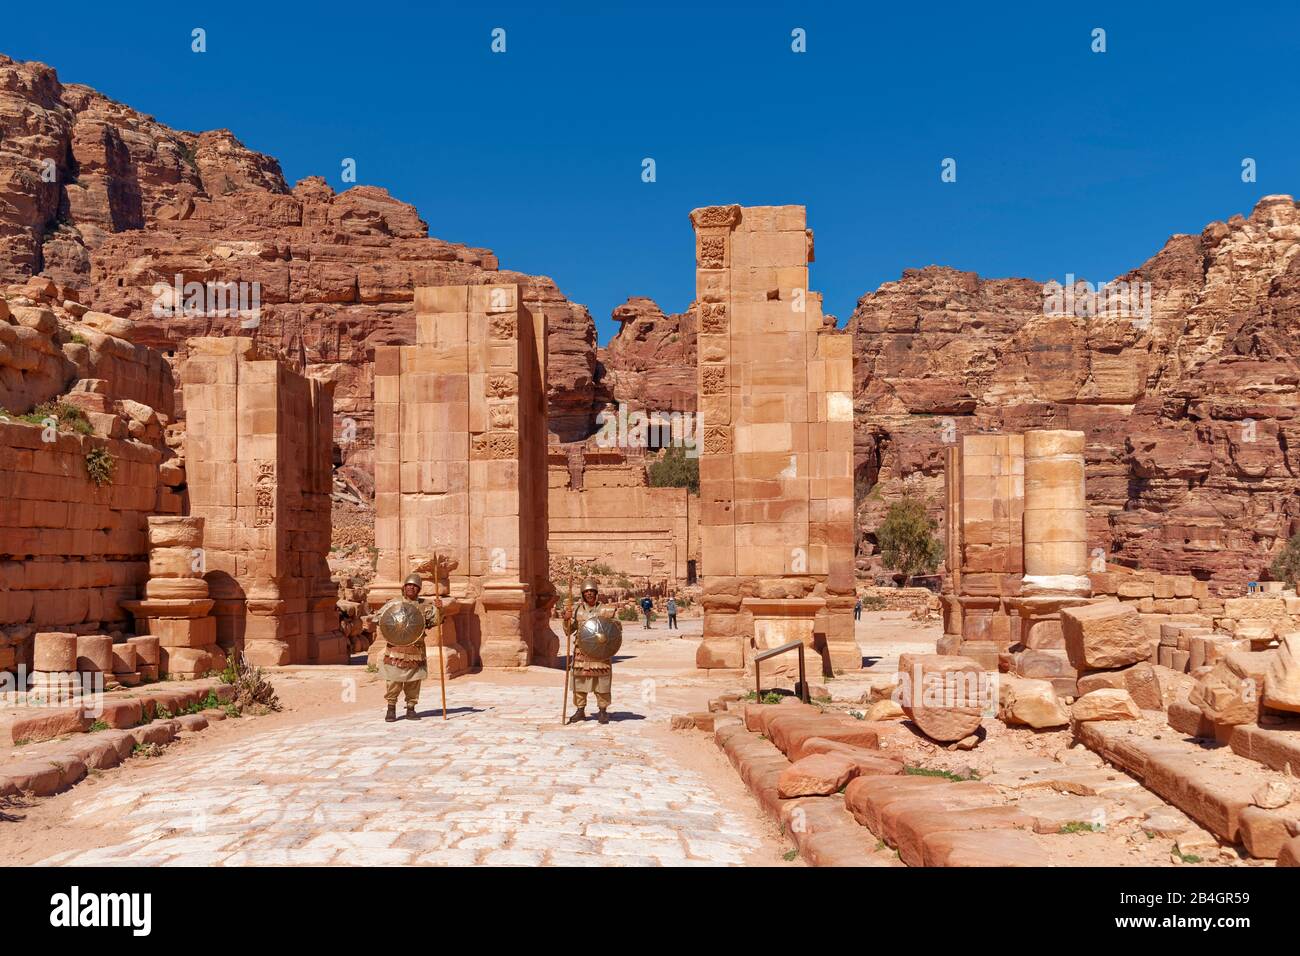 Jordan, Temple of the Lions in the rock city of Petra, Roman soldiers Stock Photo